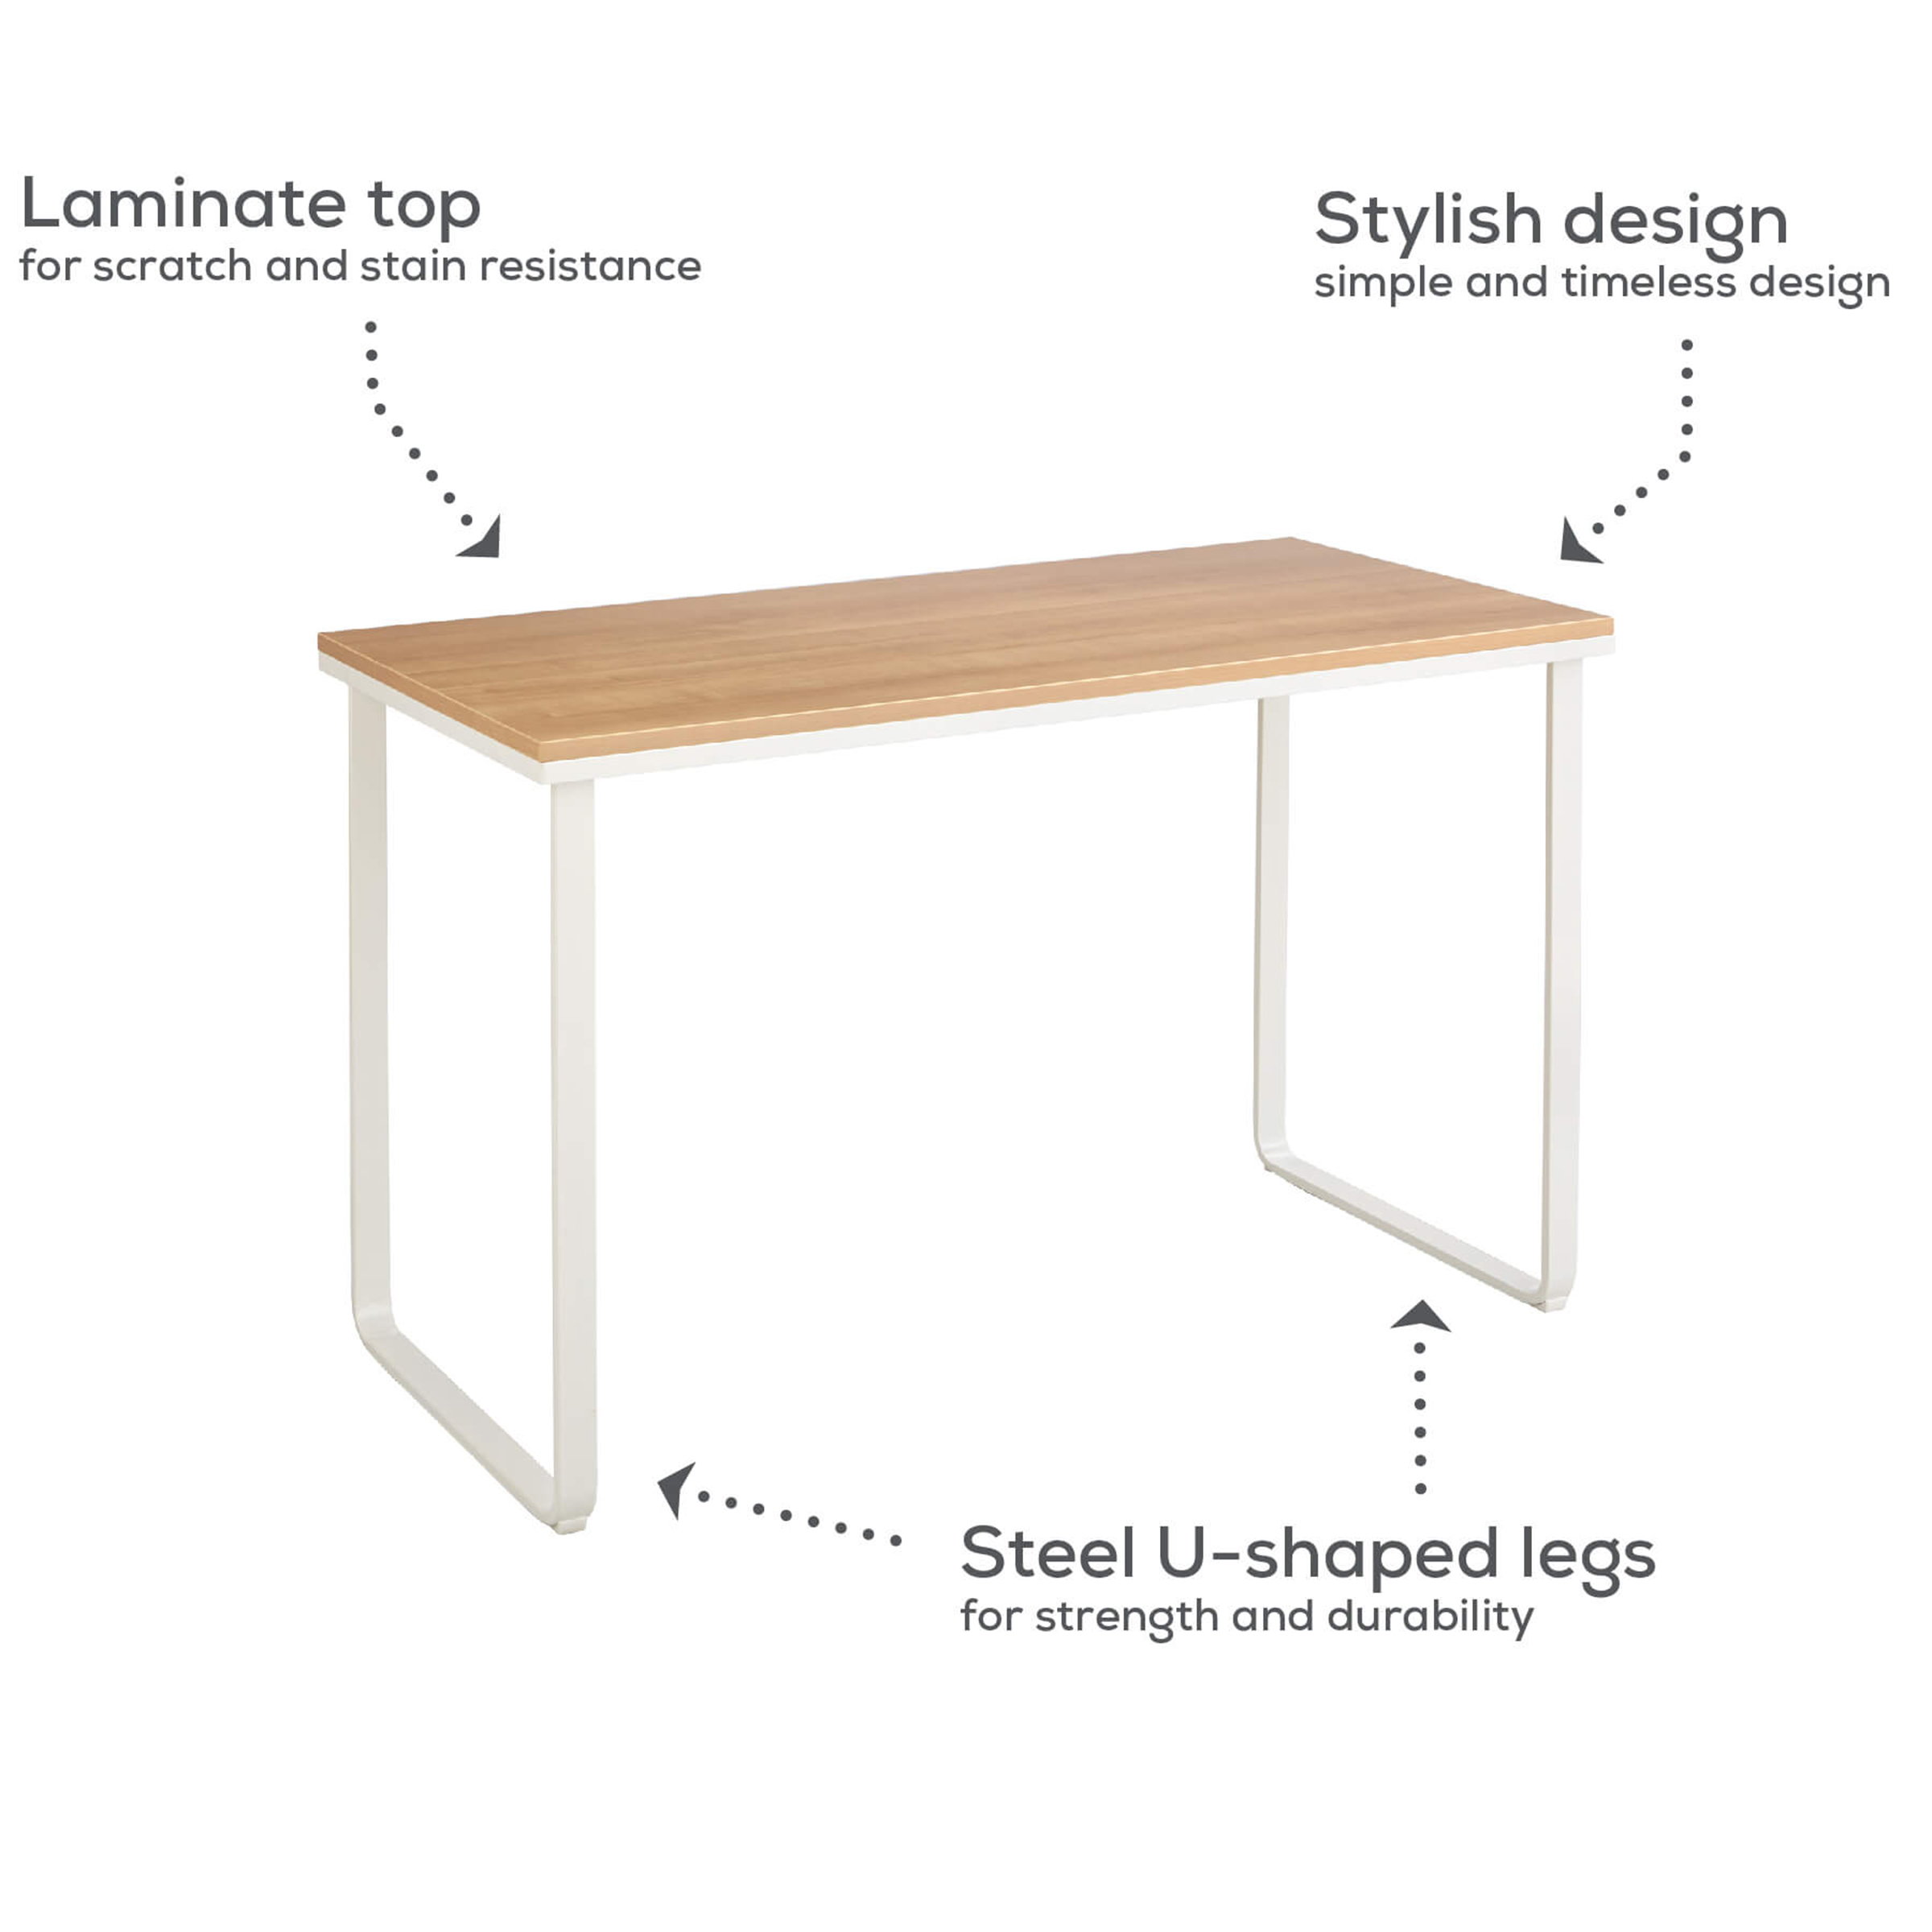 Small home office desk features